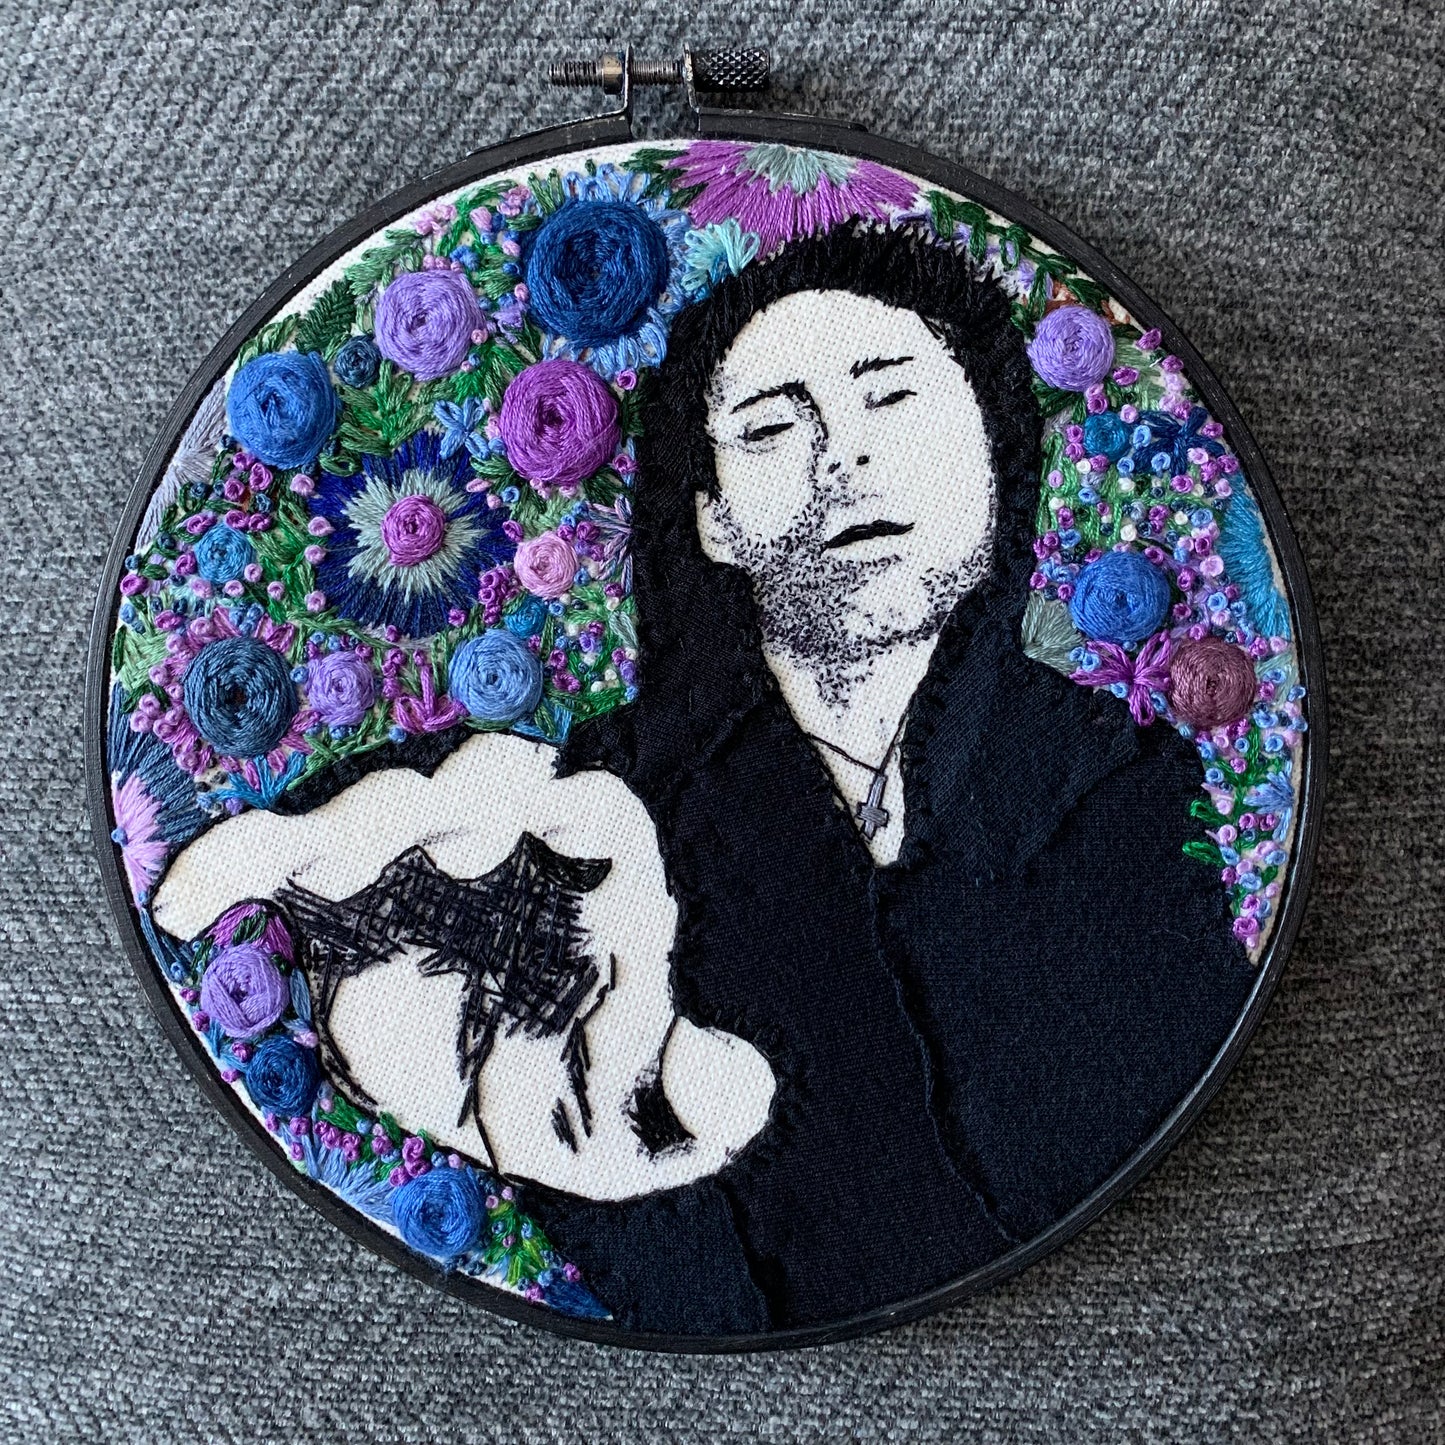 Davey Havok of AFI, embroidery hoop, handmade. Aerial view against a grey textured background